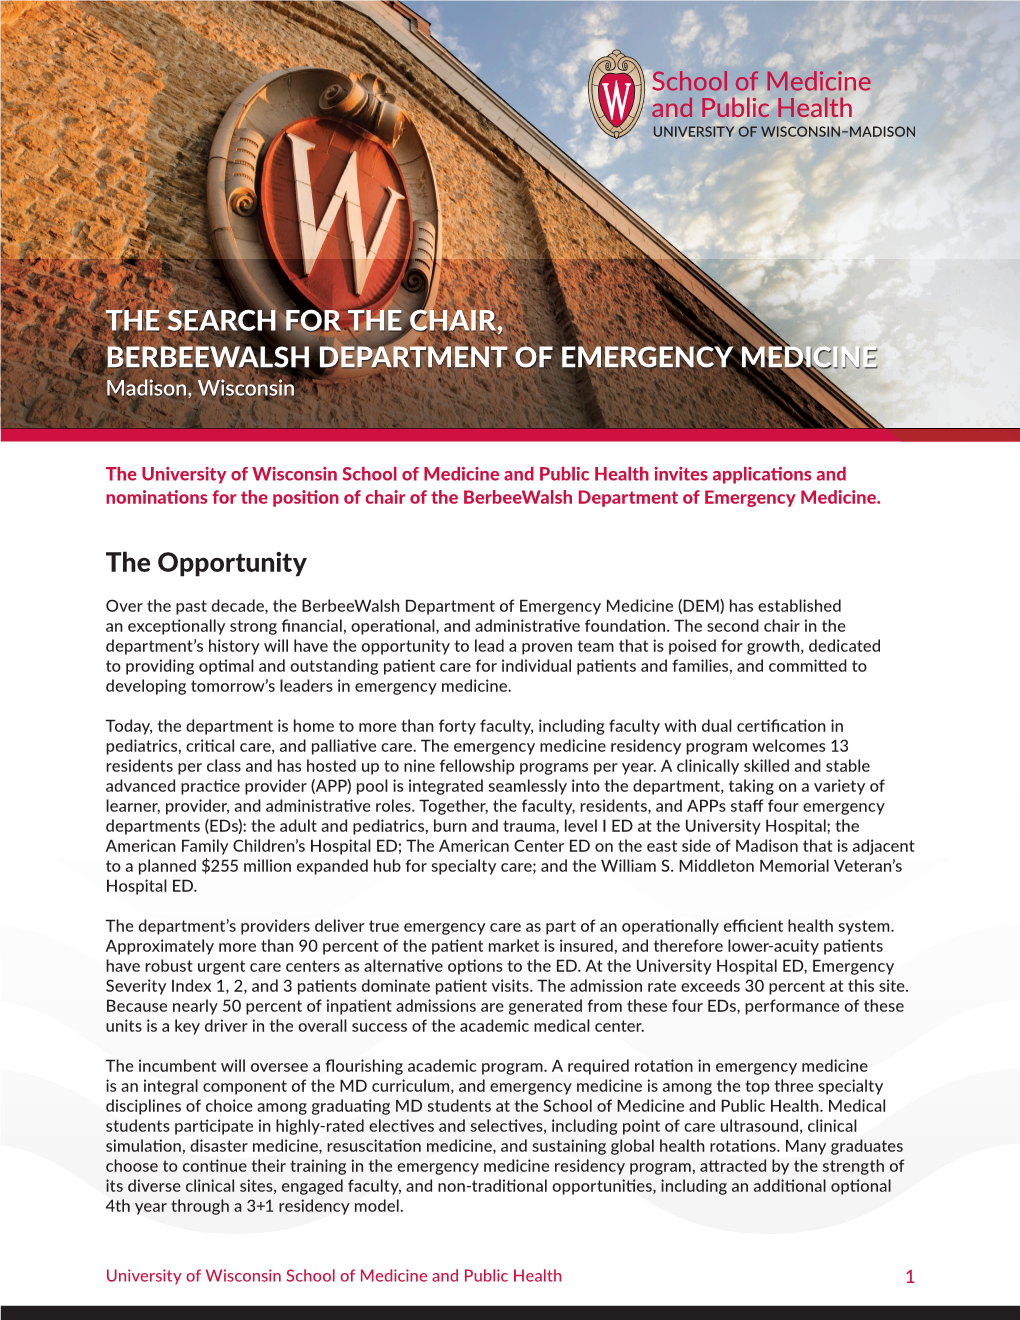 THE SEARCH for the CHAIR, BERBEEWALSH DEPARTMENT of EMERGENCY MEDICINE Madison, Wisconsin